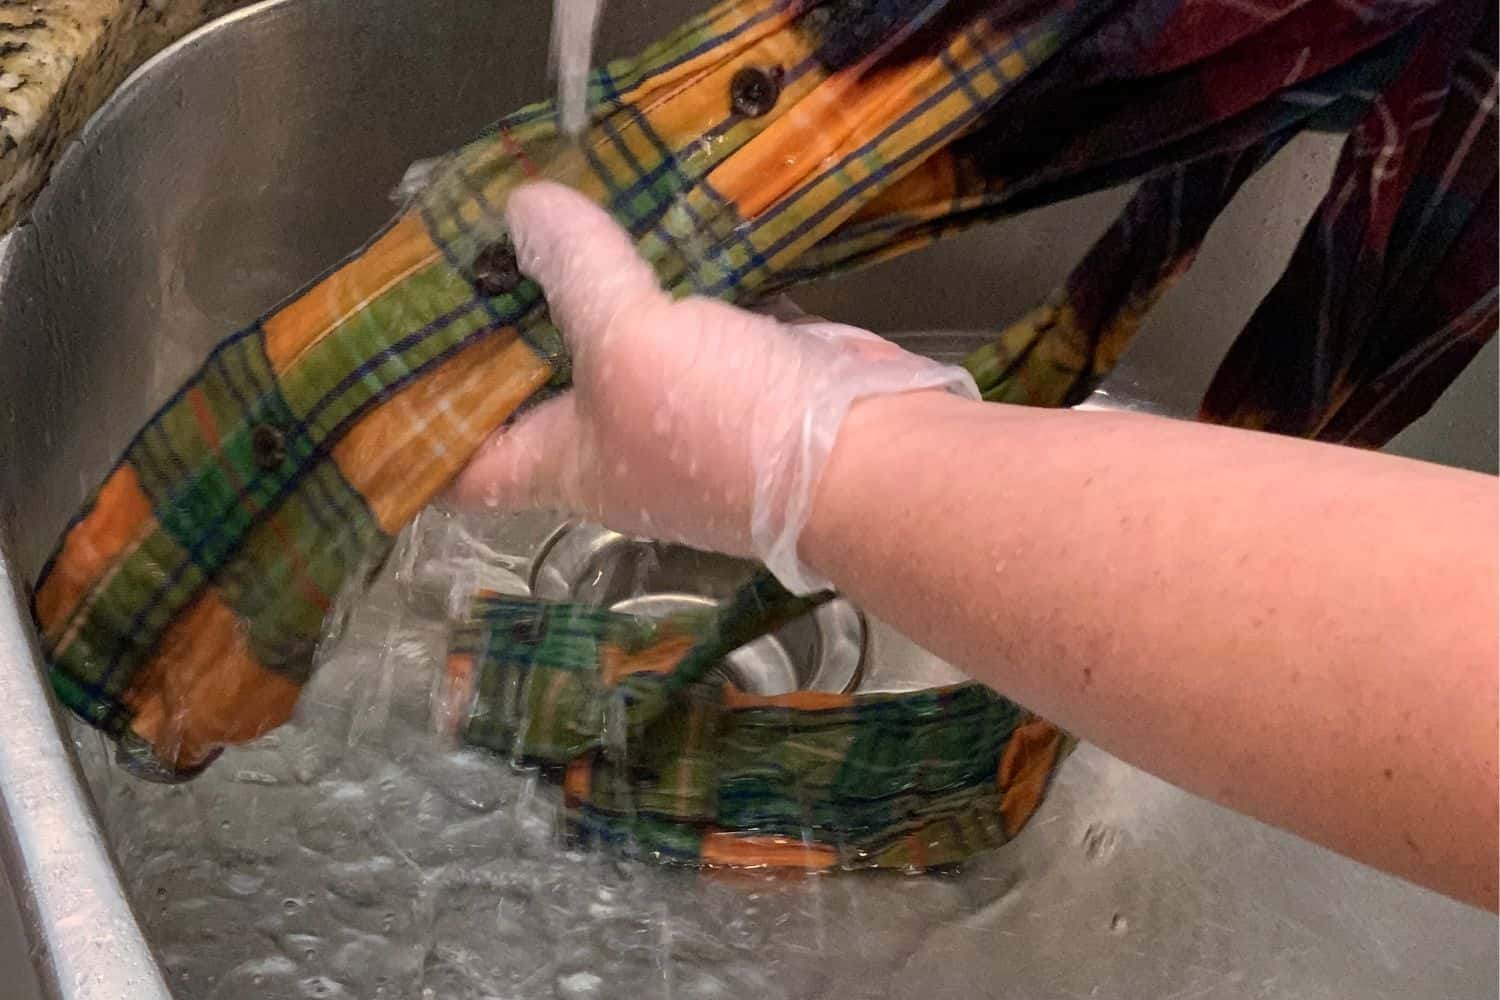 rinsing the bleach from the flannel shirt